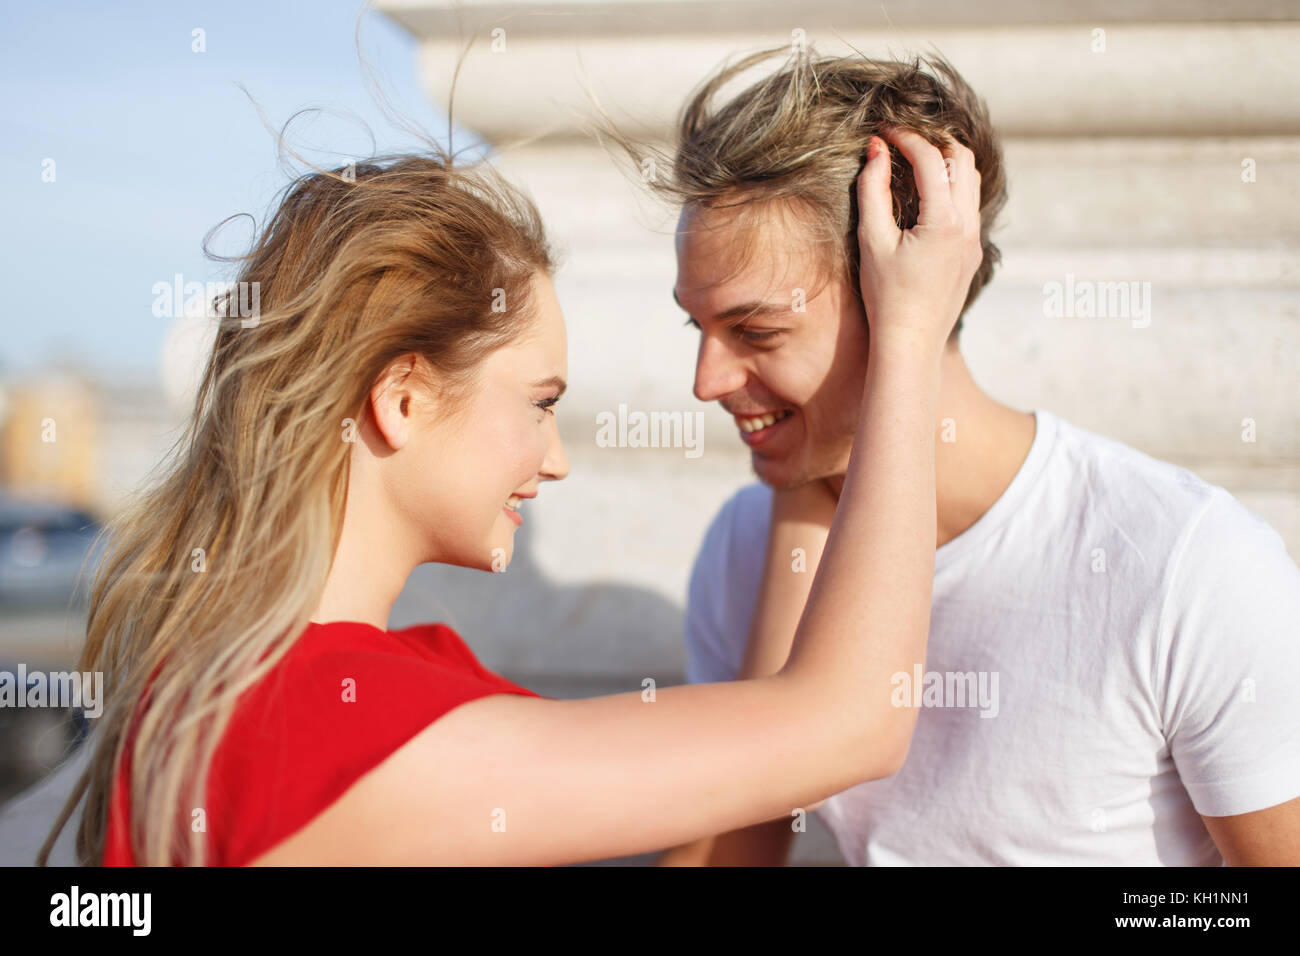 Happy couple on first date at spring, young blonde woman embrace boyfriend outdoors Stock Photo